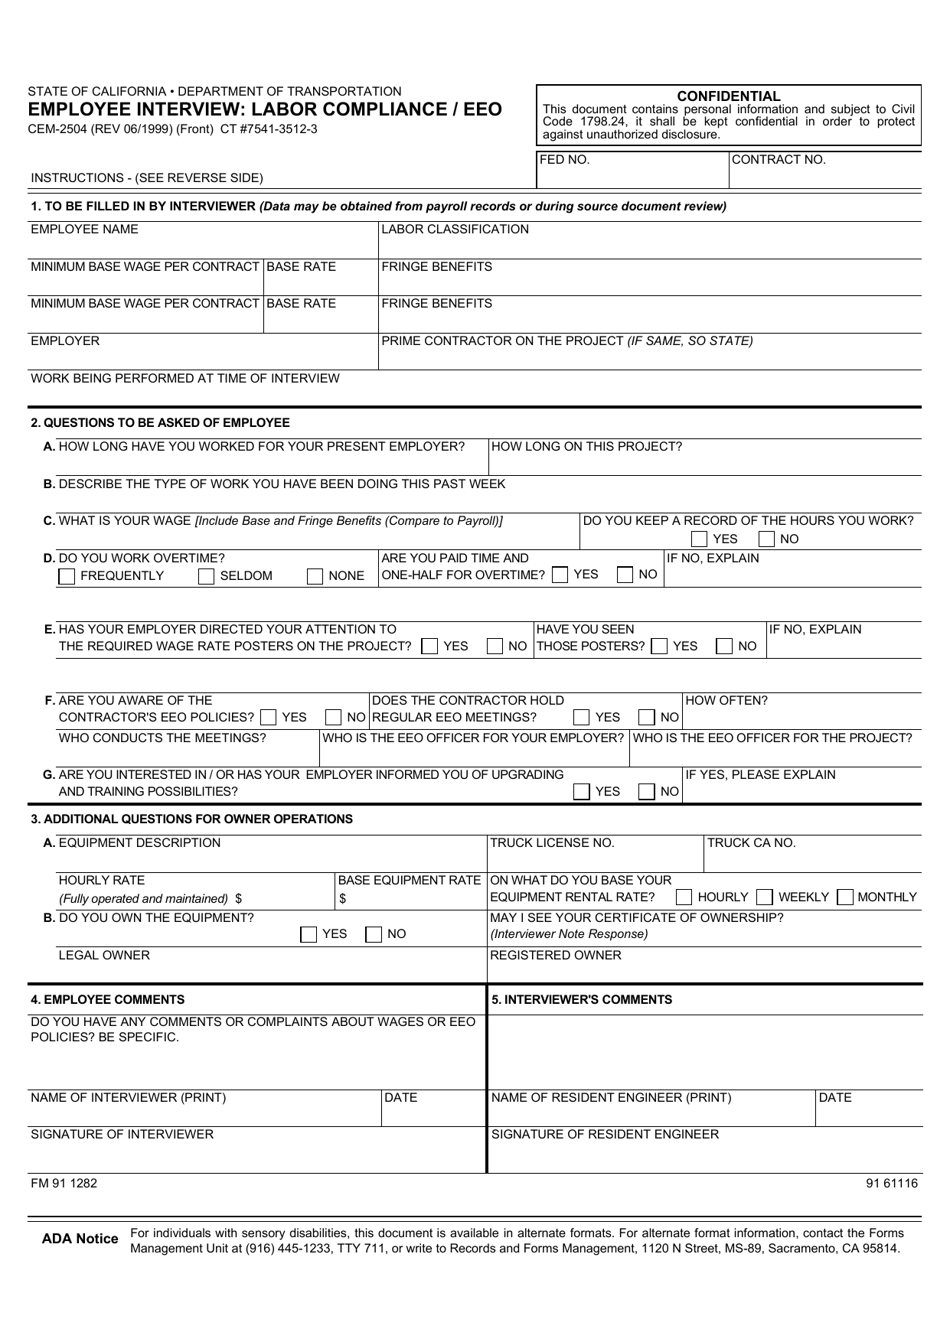 form-cem-2504-download-fillable-pdf-or-fill-online-employee-interview